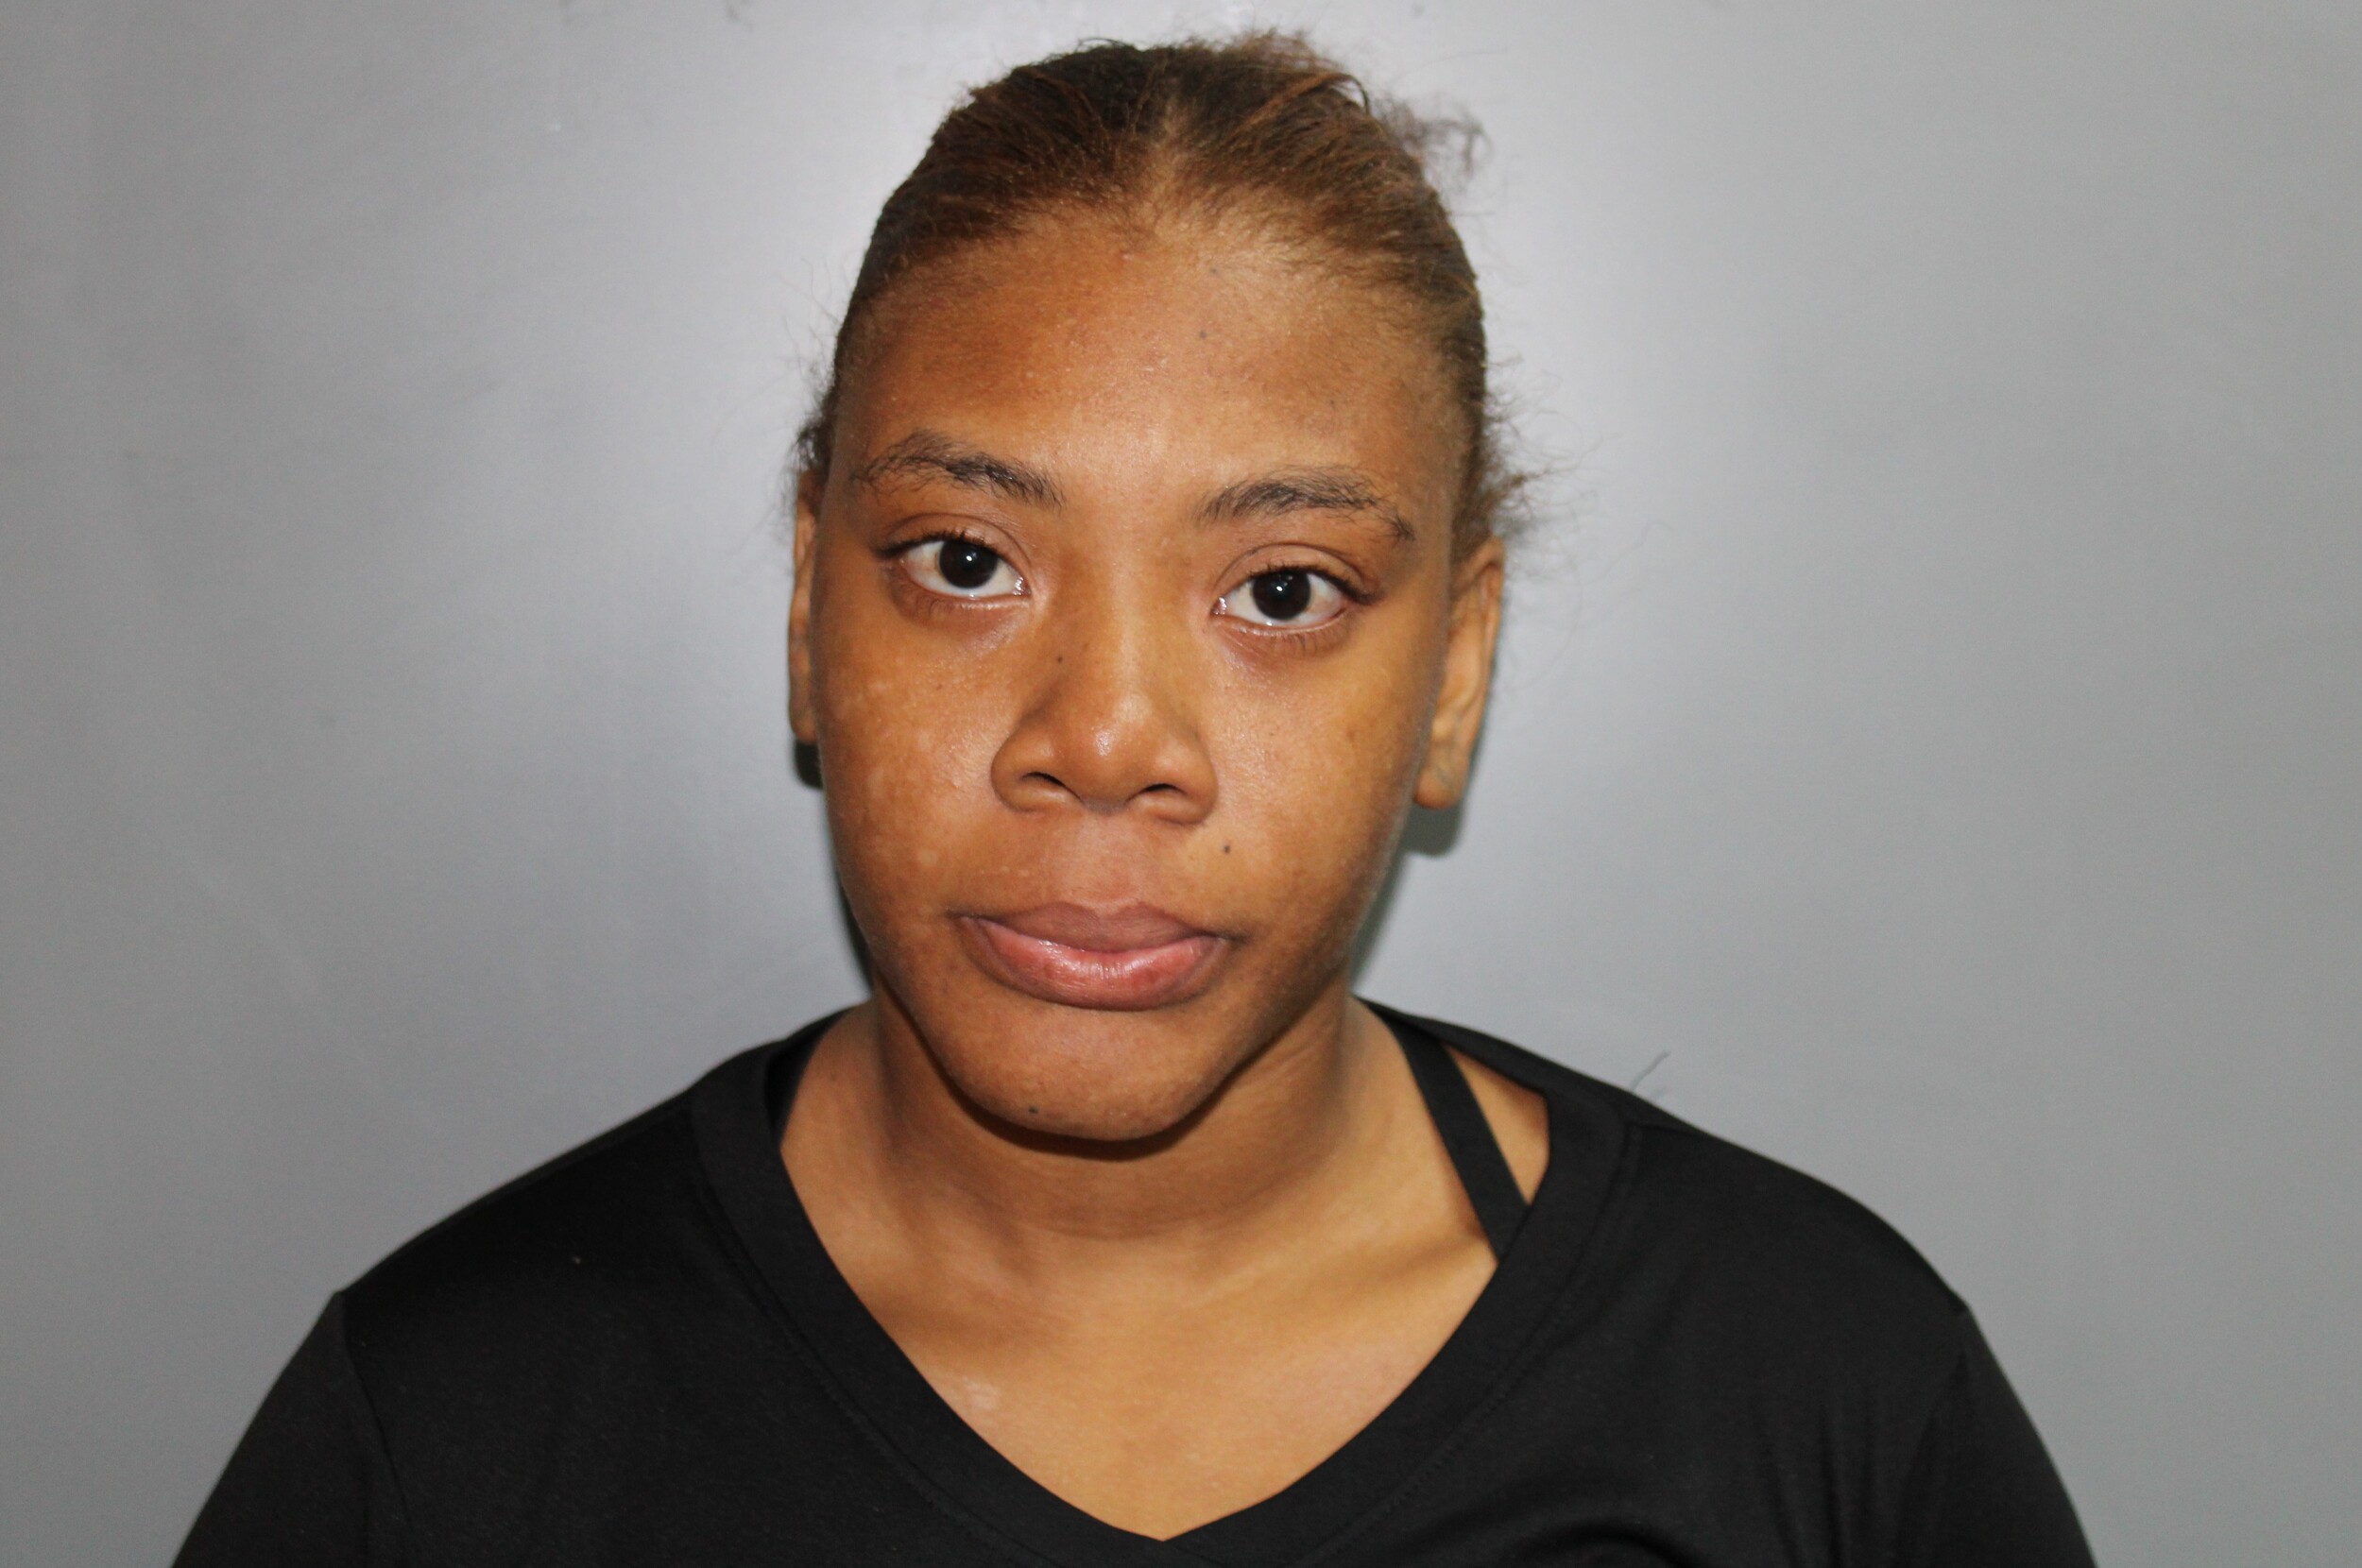 Woman Stole Credit Card Info To Buy $2,337 In Gold Jewelry: VIPD